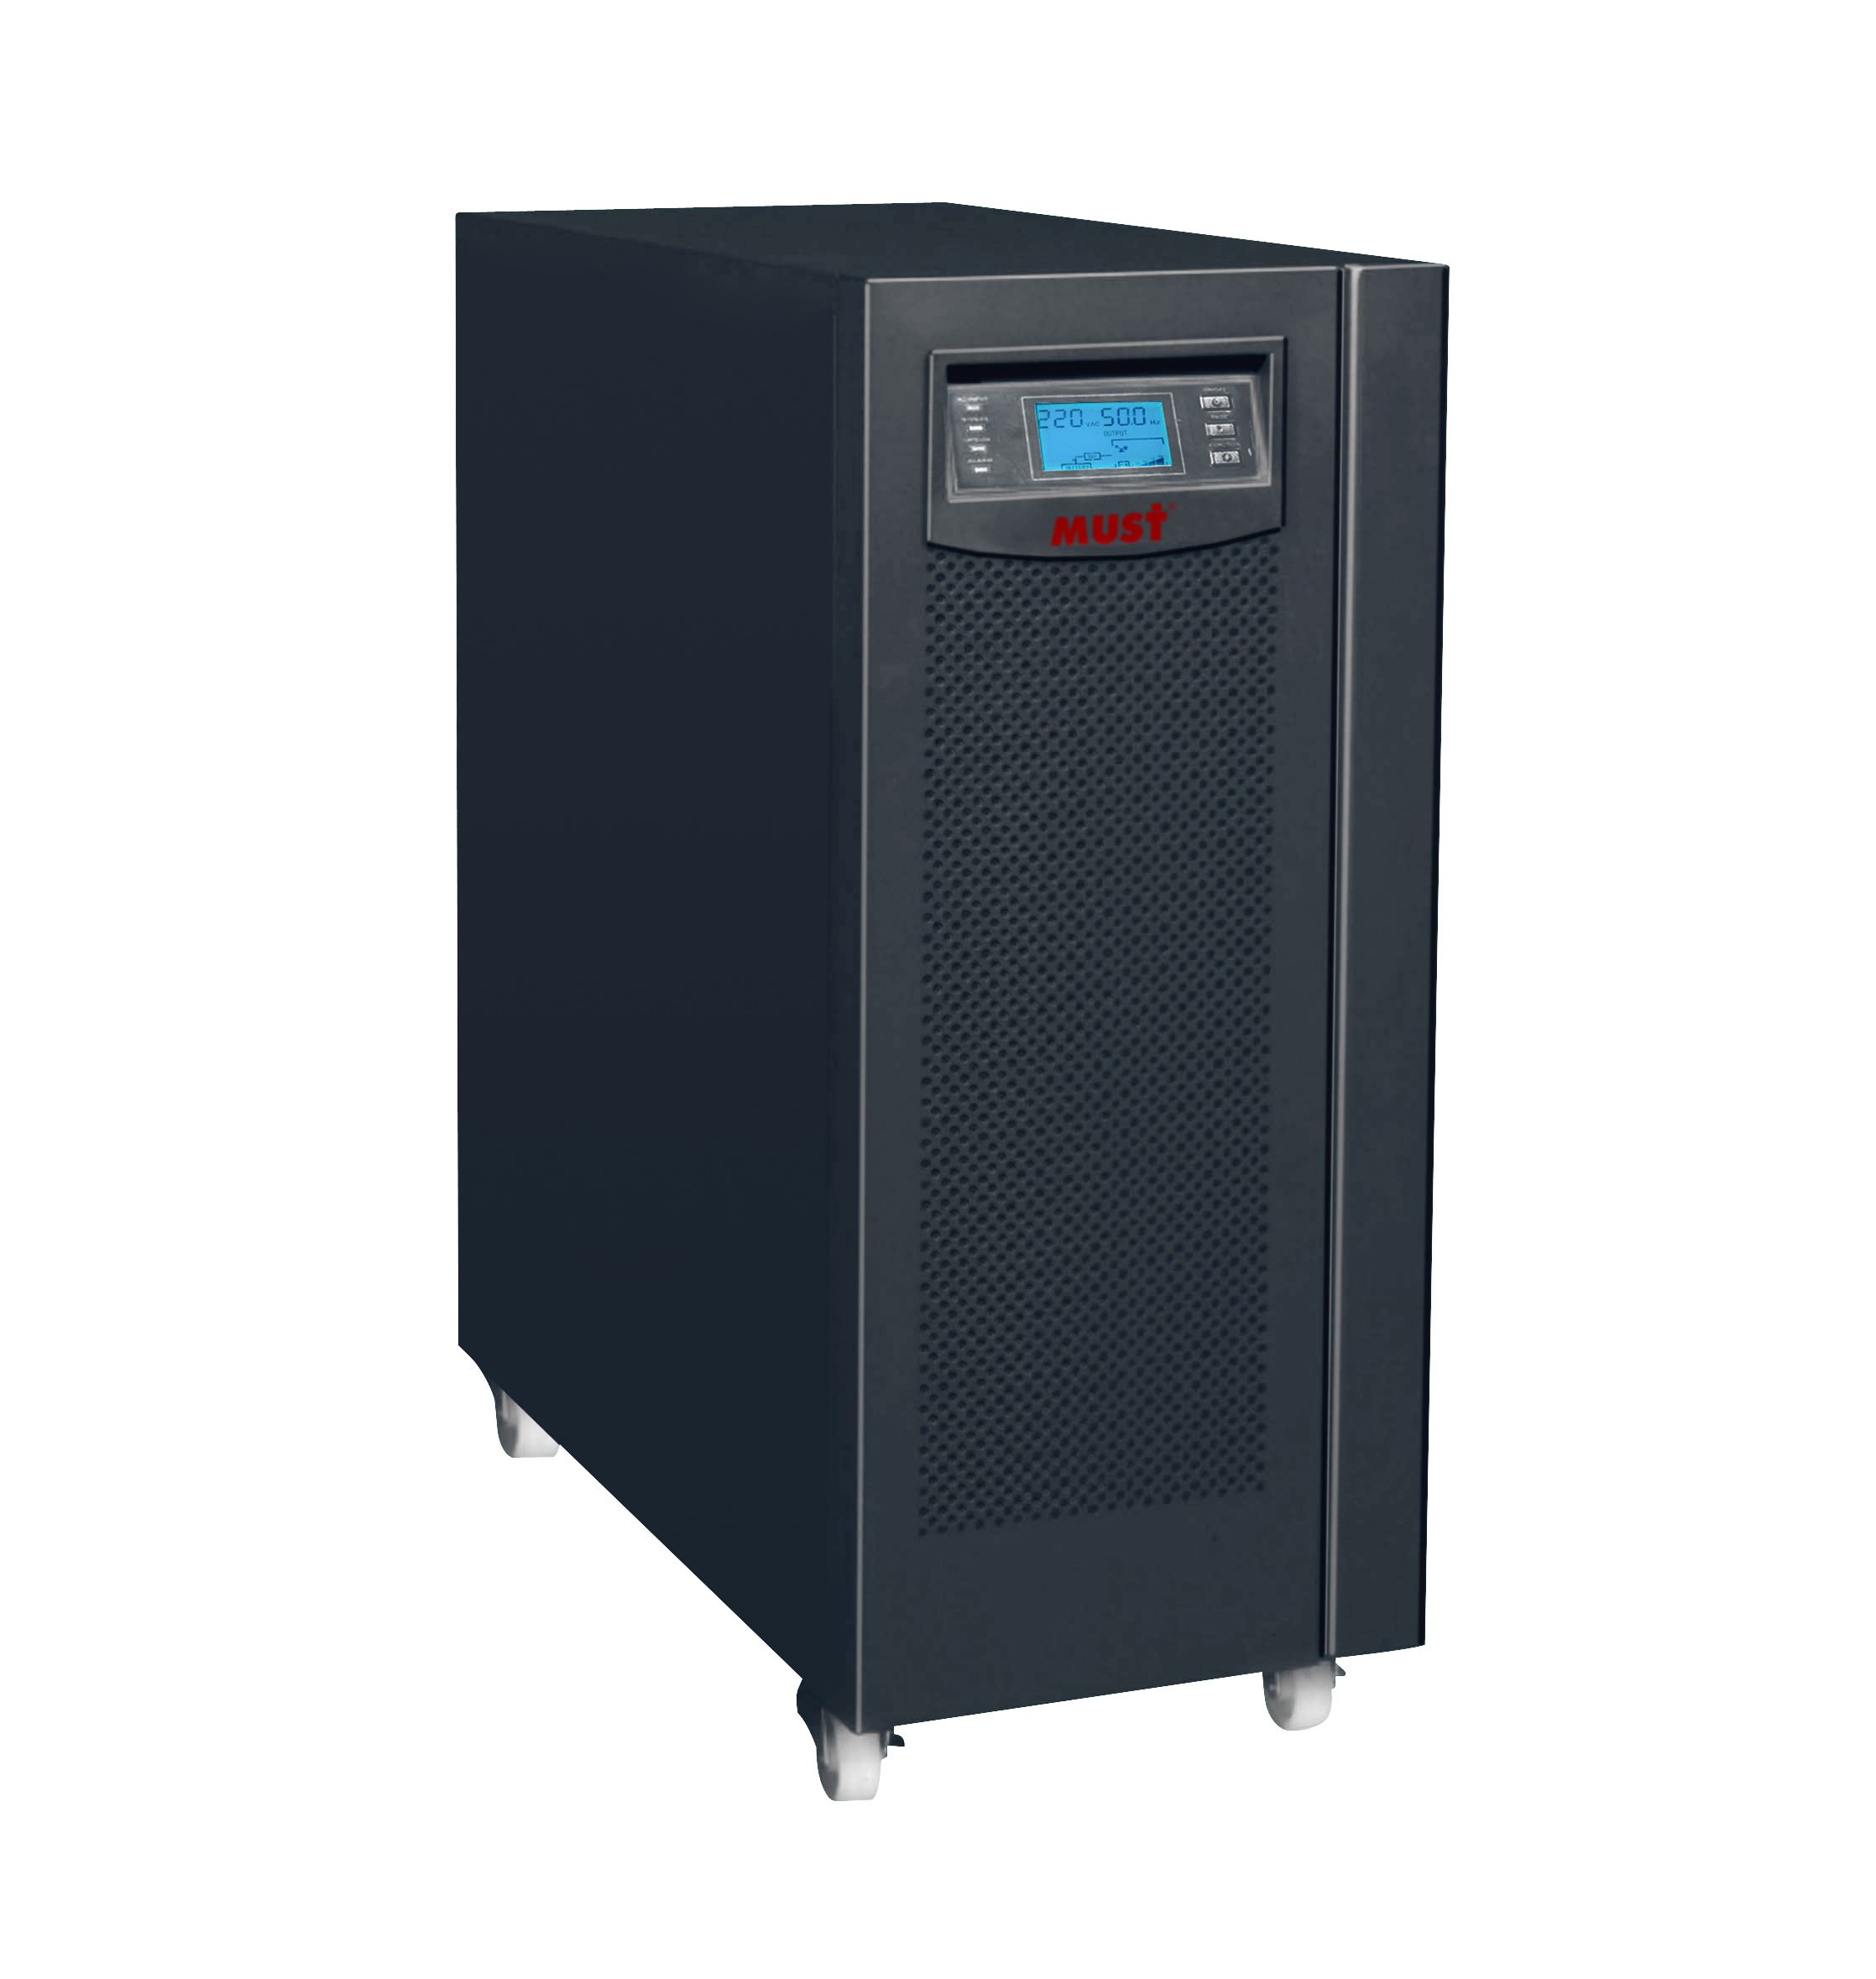 EH5000 External Battery Series High Frequency Three Phase (3/1) Online UPS (10-20KVA)